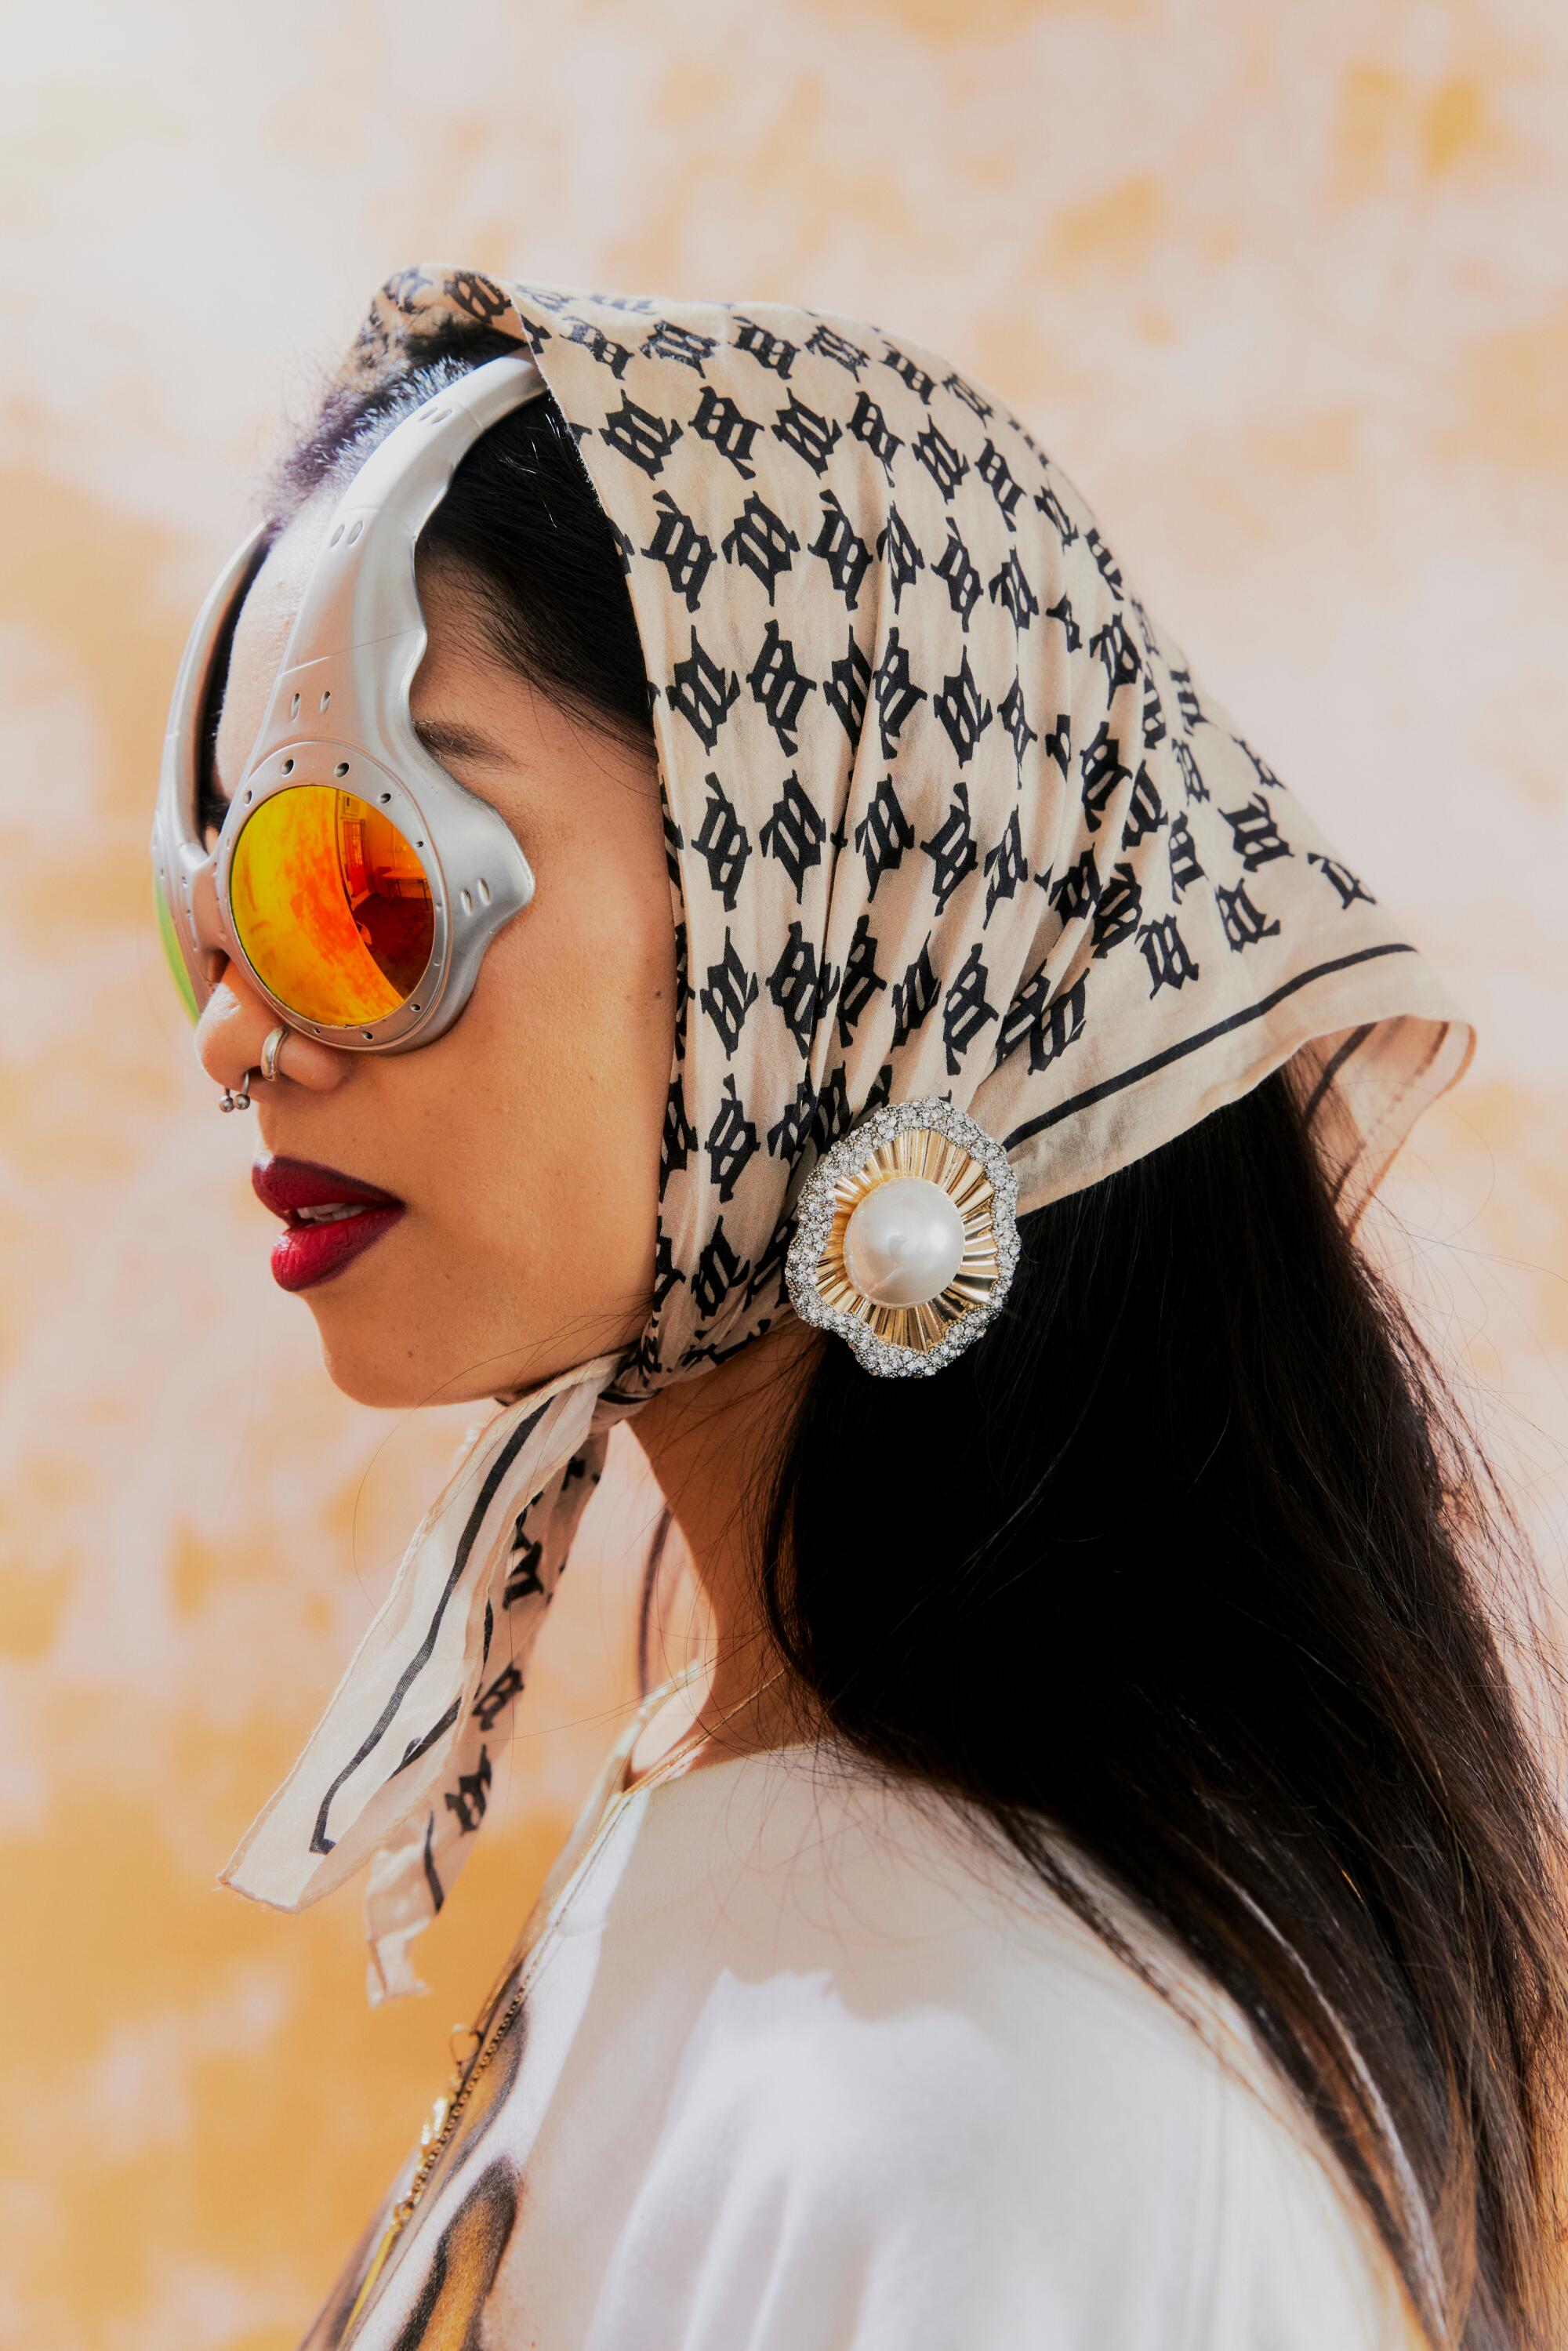 Ann-Marie Hoang in profile wearing a headscarf and Over the Top sunglasses.